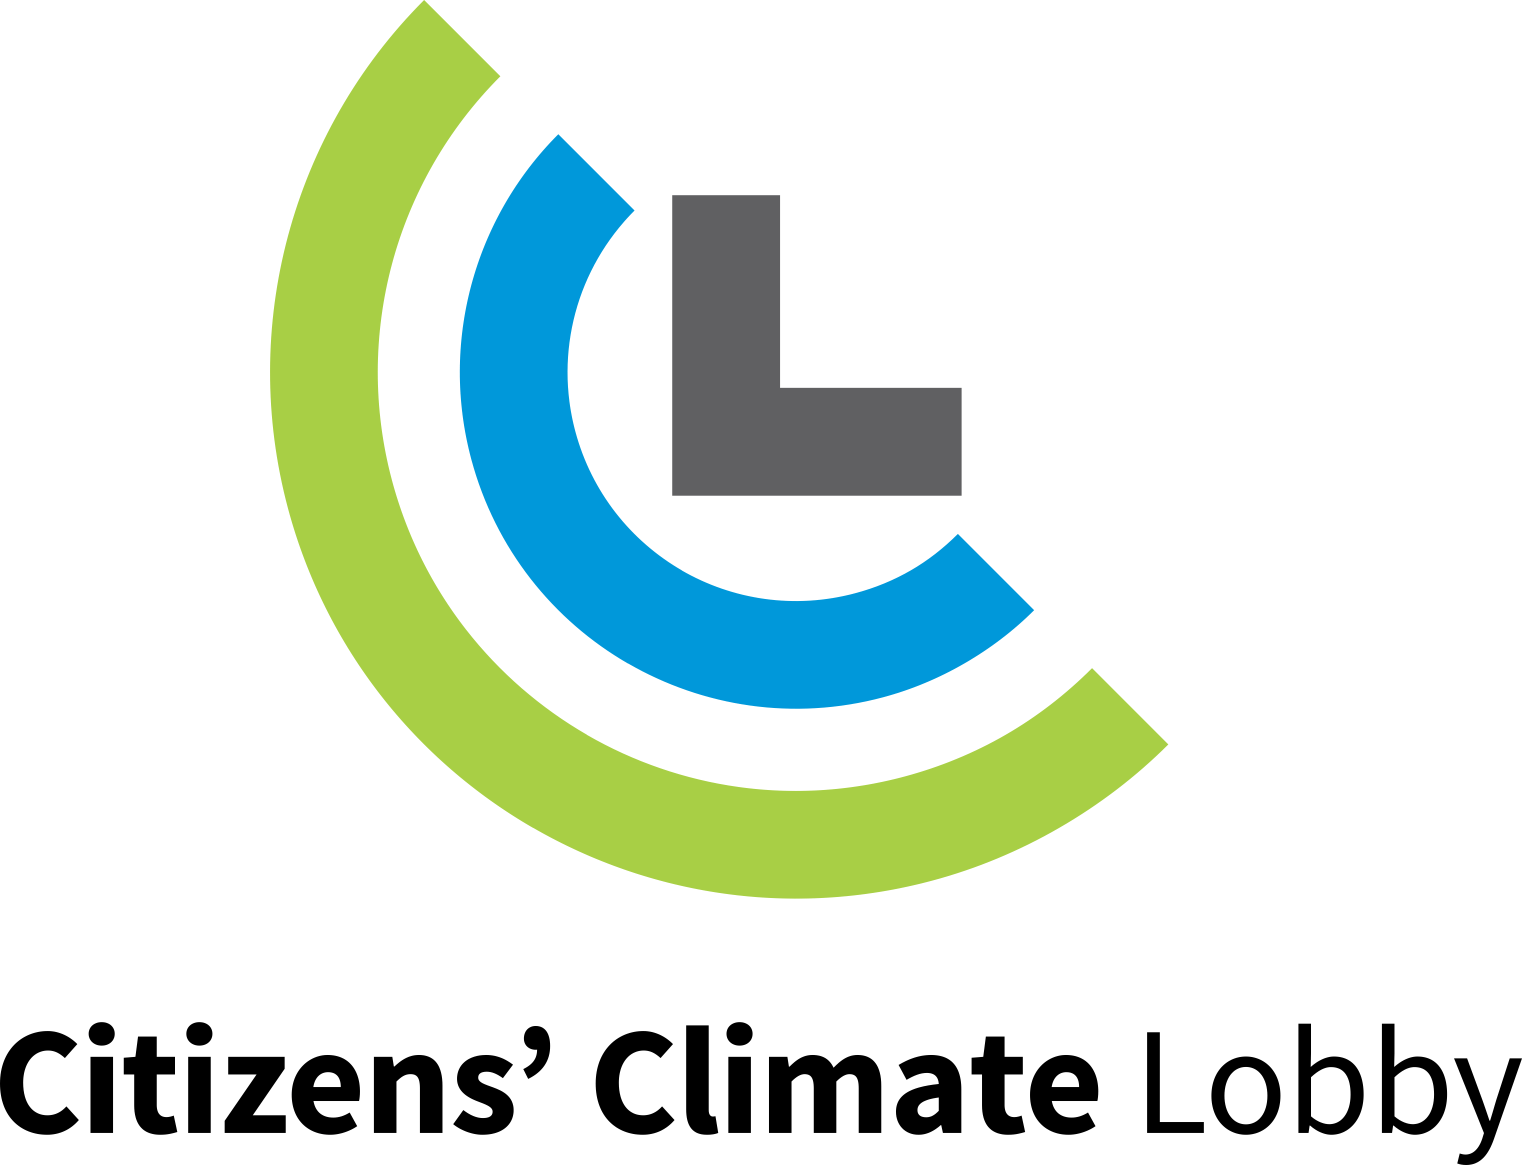 Visit https://citizensclimatelobby.org/chapters/NY_Mid_Hudson_Valley/